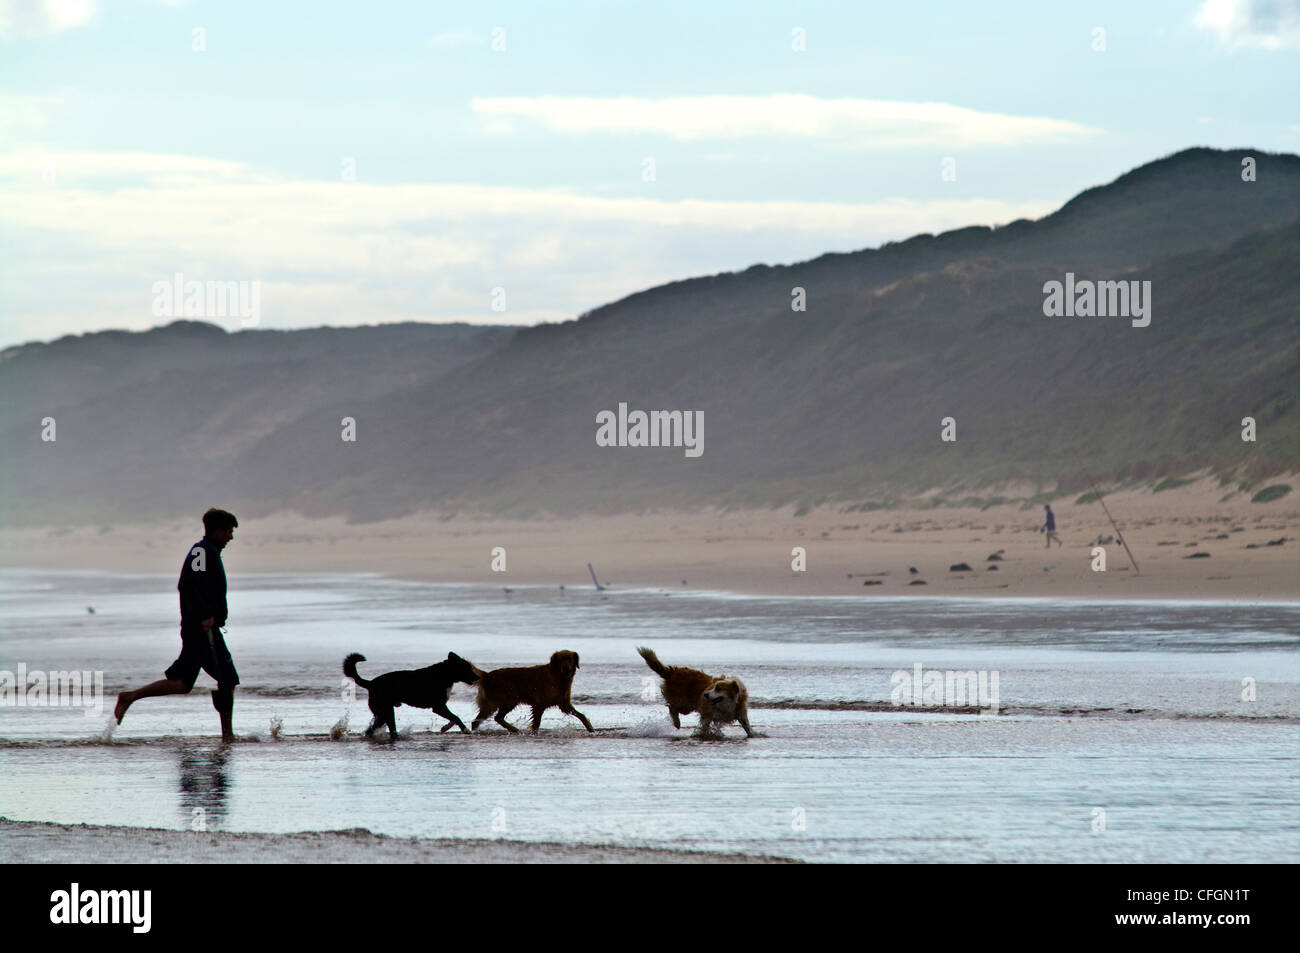 A man runs with his pet dogs in the shallows of a wide beach. Stock Photo